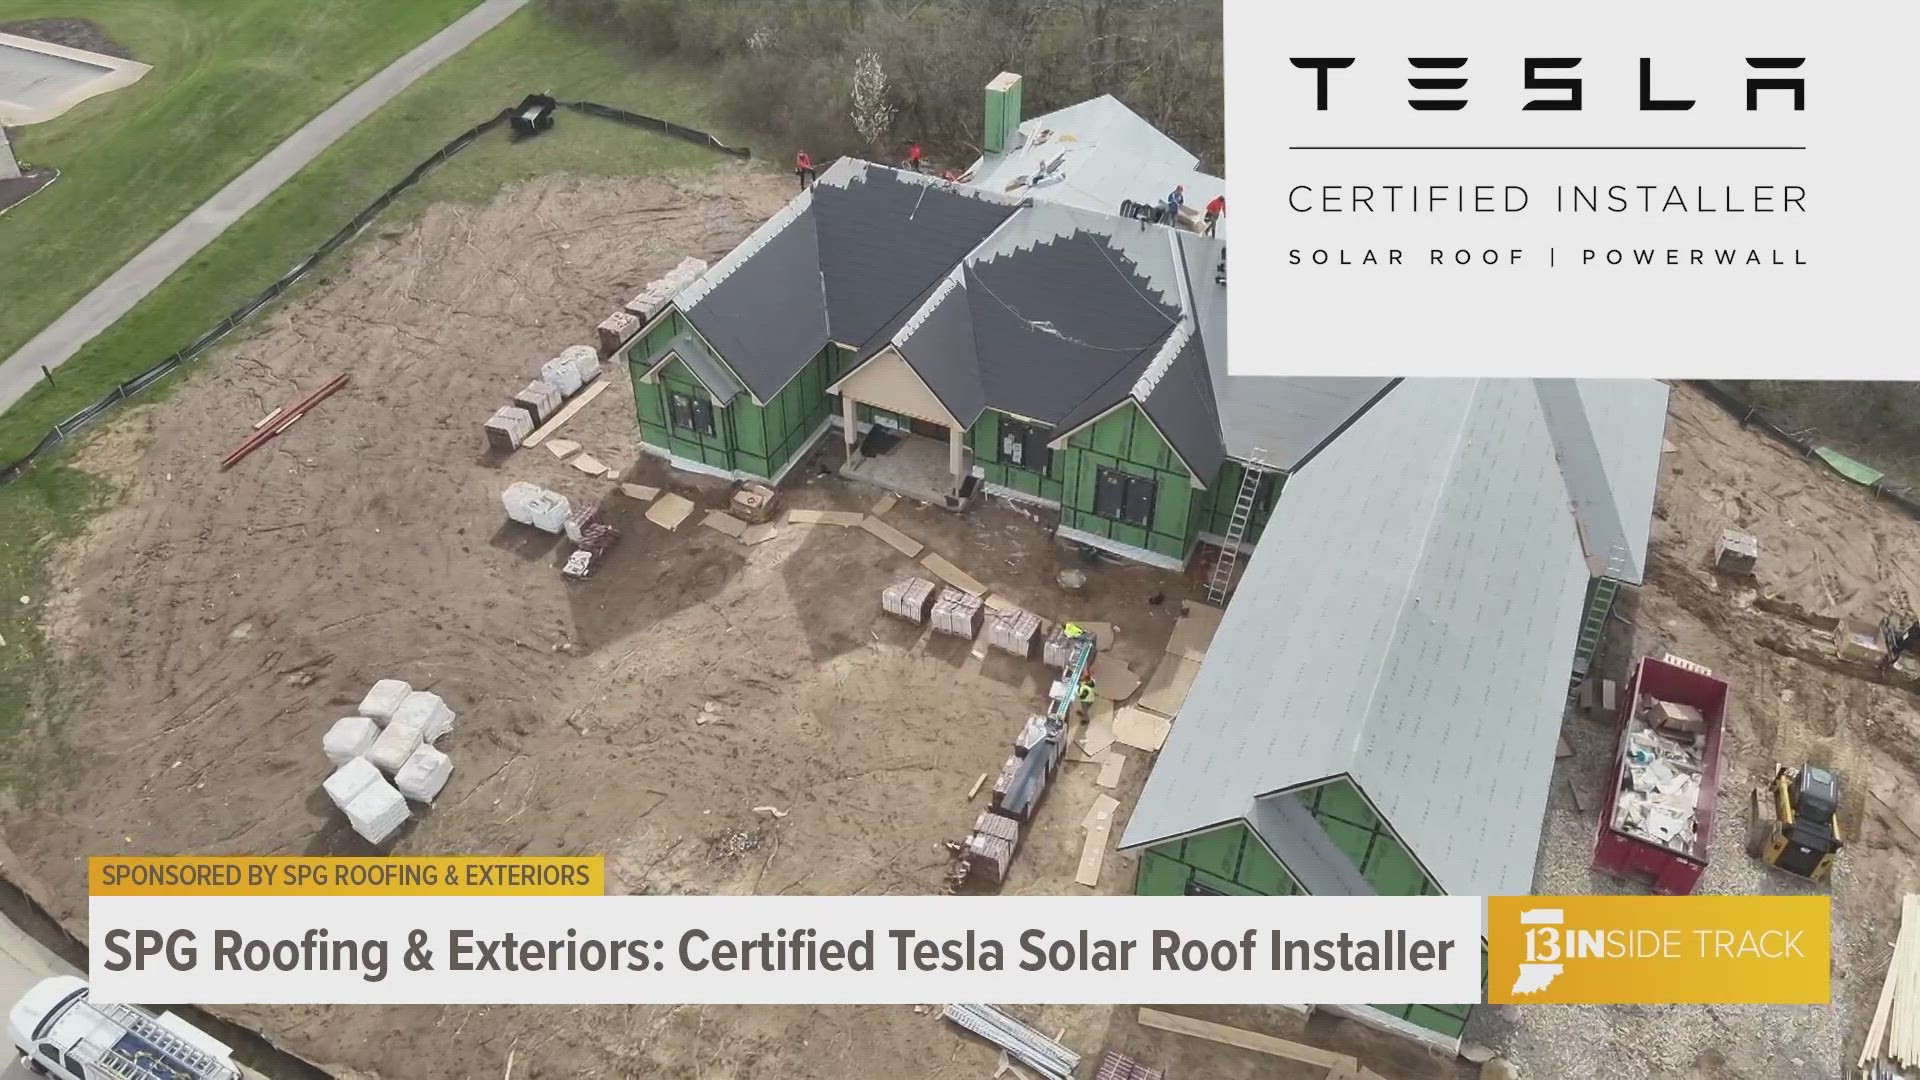 TESLA Solar Roofing is now available in Indiana for people looking for energy independence.